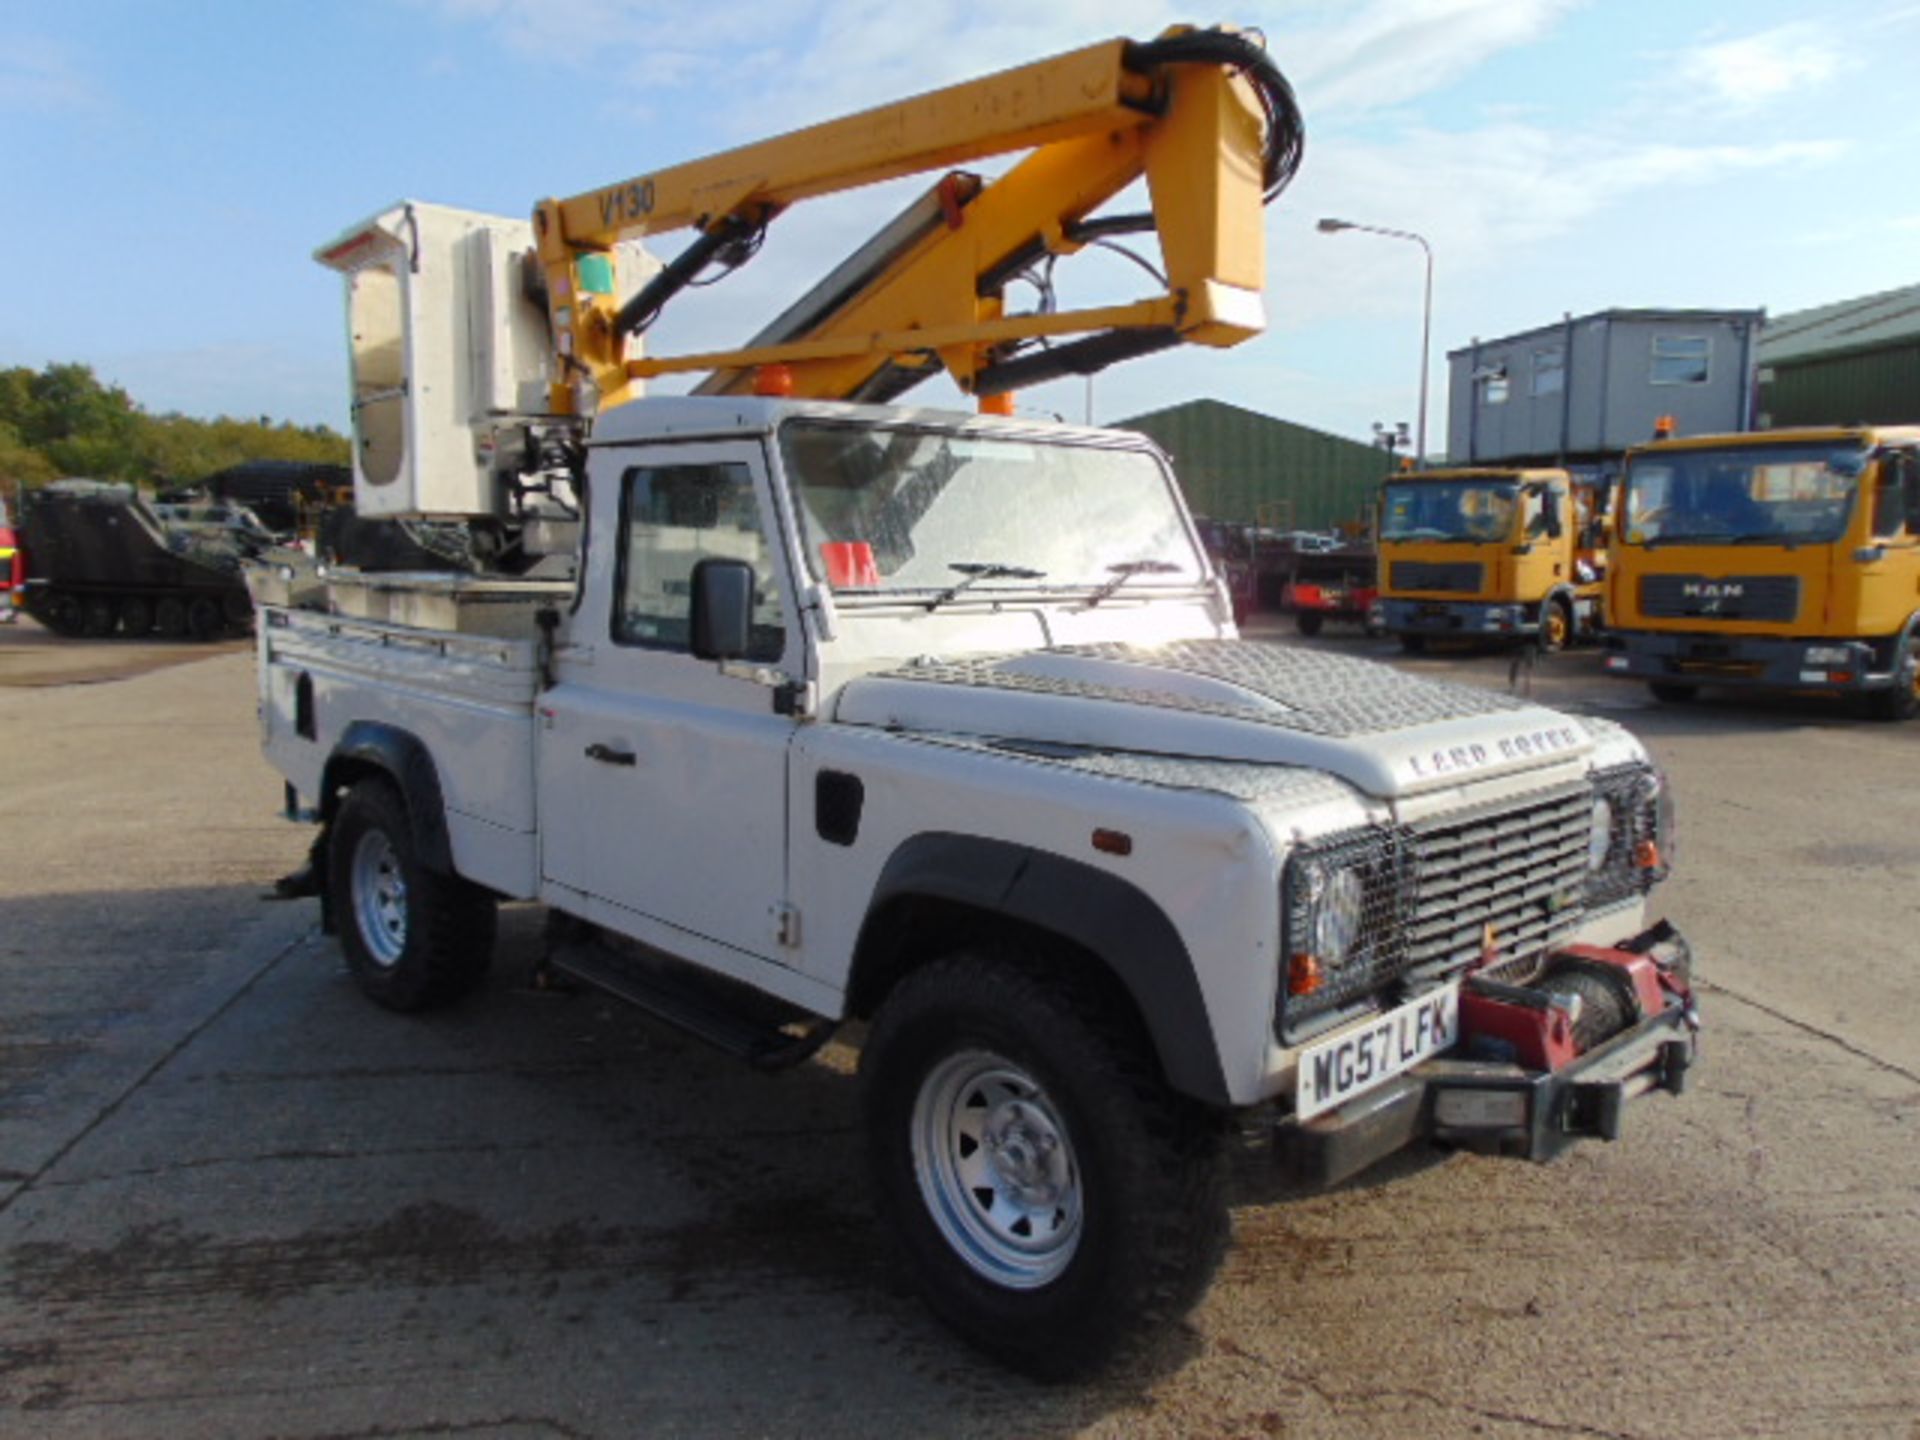 Land Rover Defender 110 High Capacity Cherry Picker - Image 3 of 40